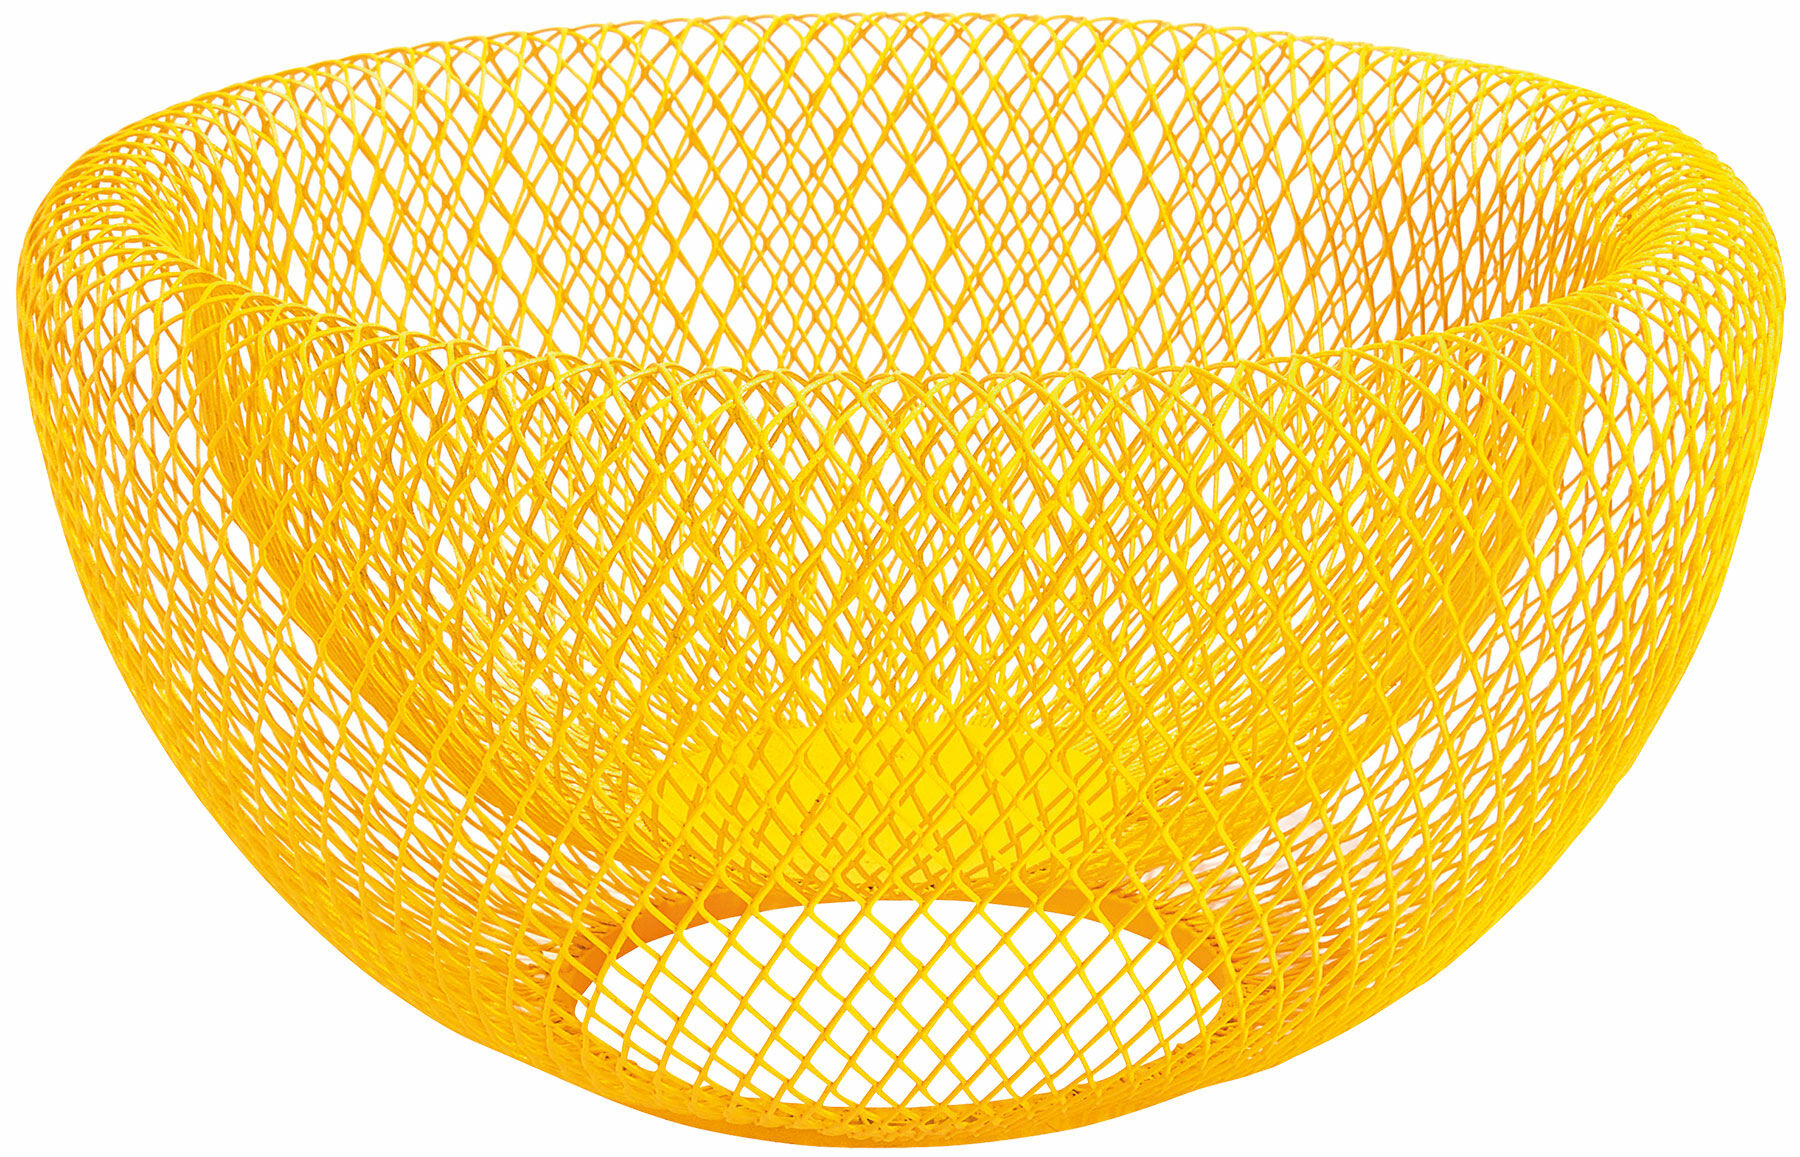 Coupe à fruits "Mesh", version jaune - Collection MoMA